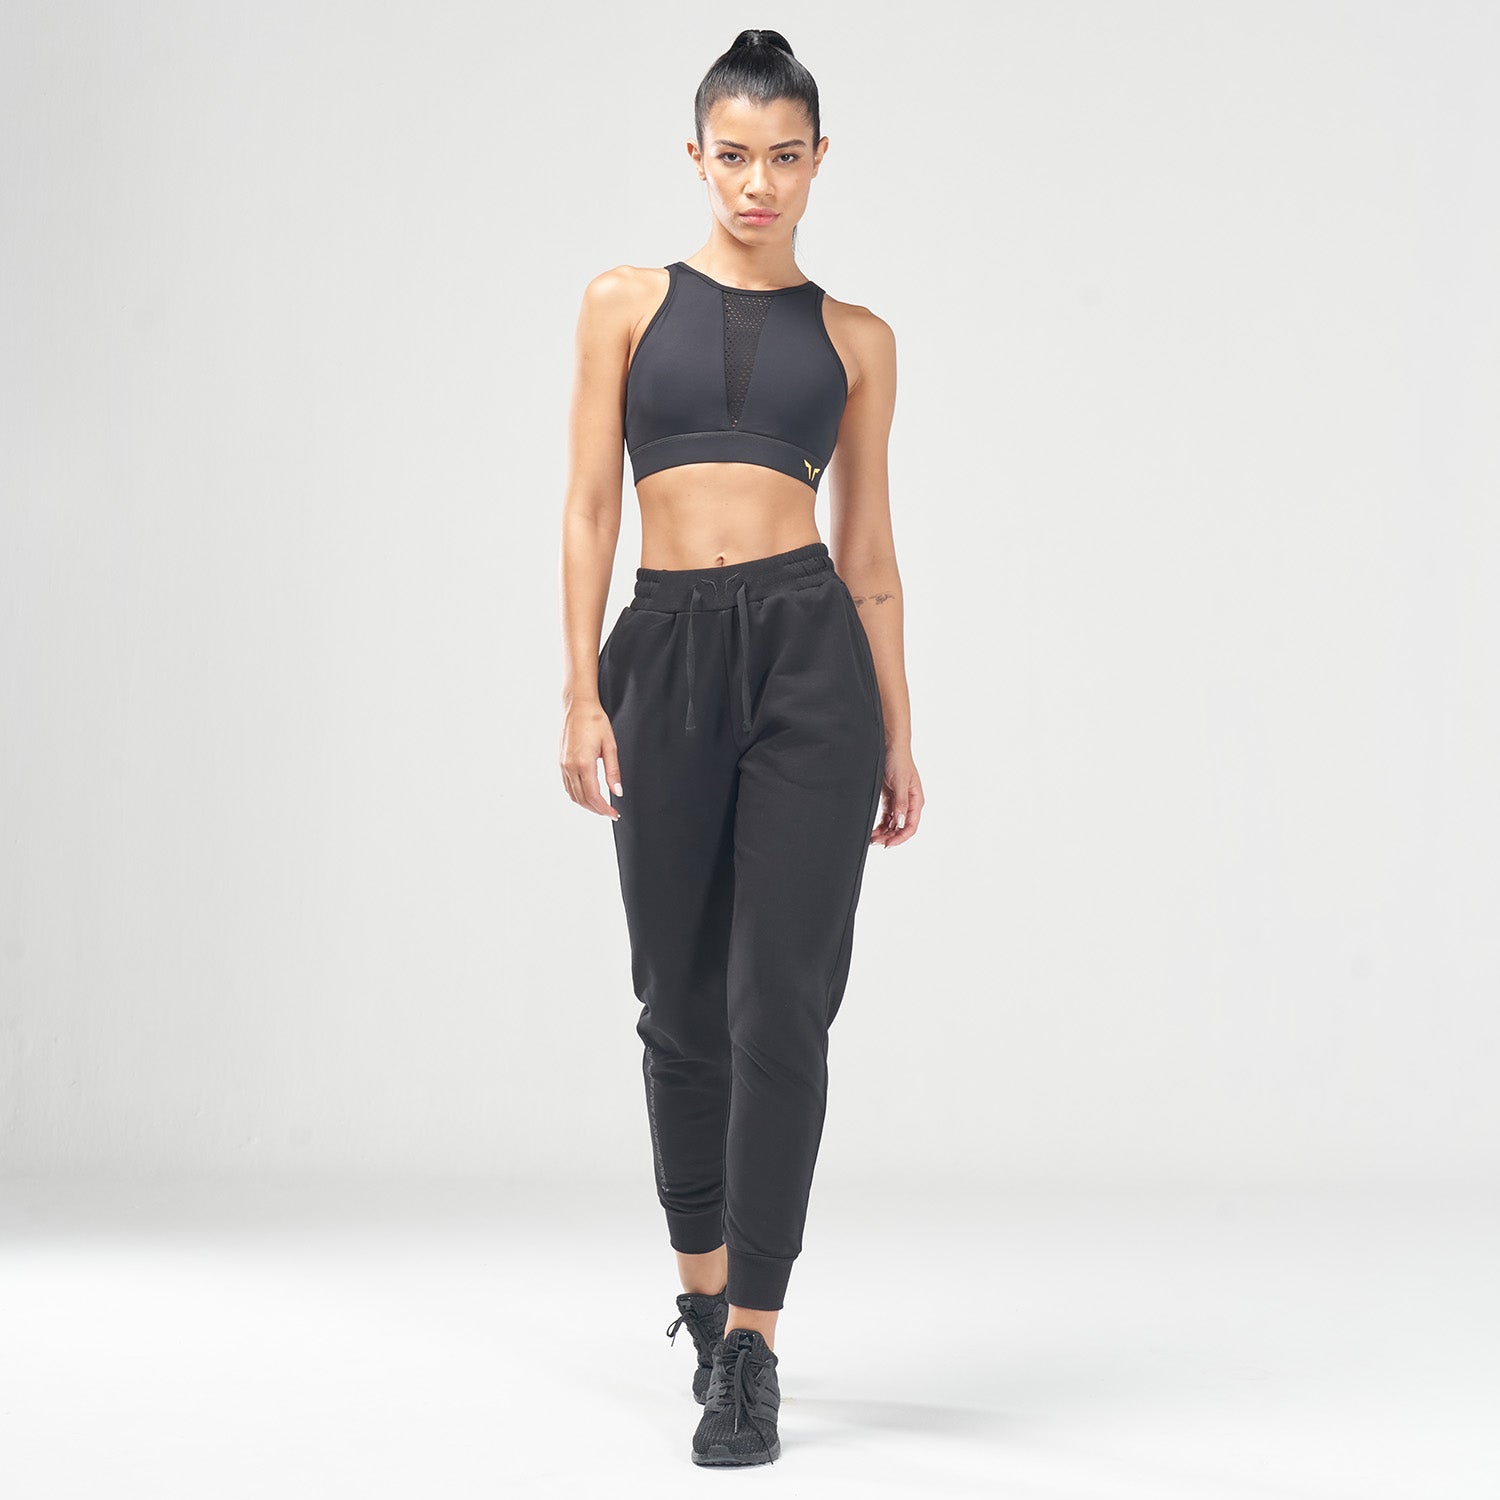 squatwolf-workout-clothes-code-relaxed-joggers-black-gym-pants-for-women